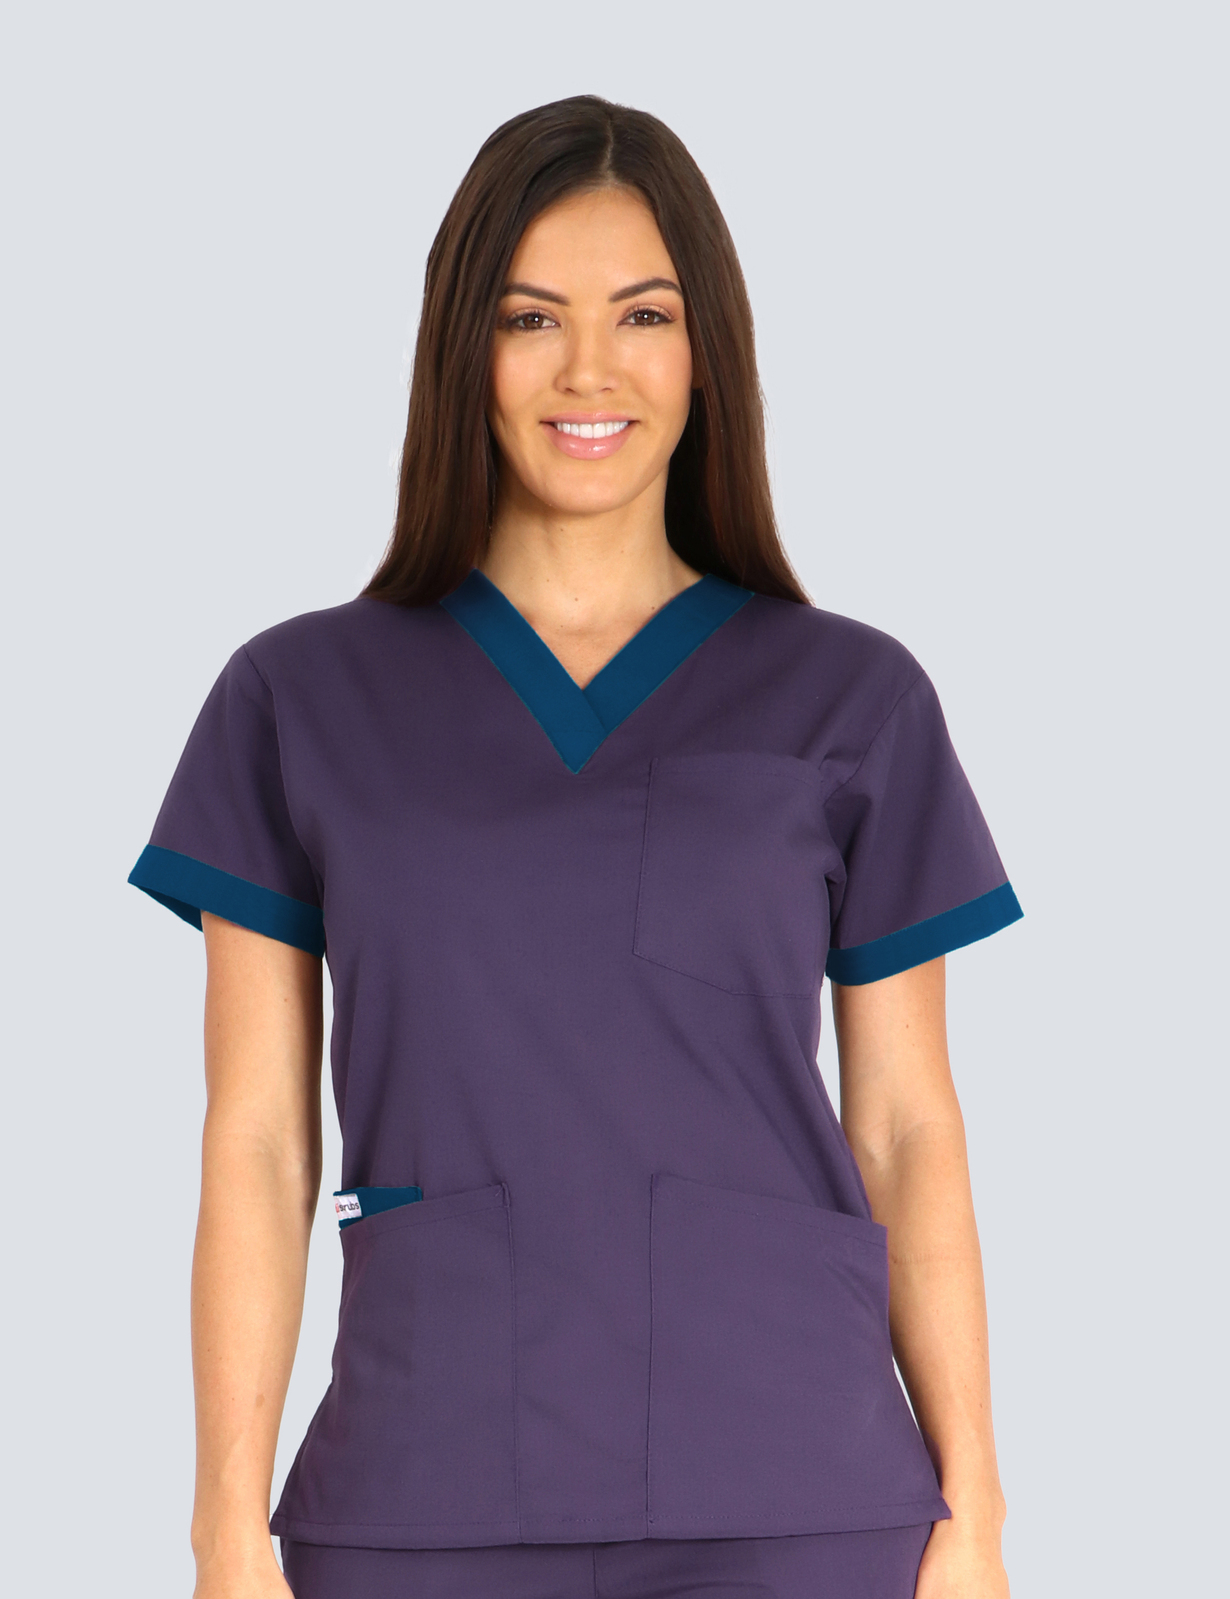 NWRH - Oncology RN (Contrast V-neck Trim Scrub Top in Aubergine with Navy Trim incl Logos)